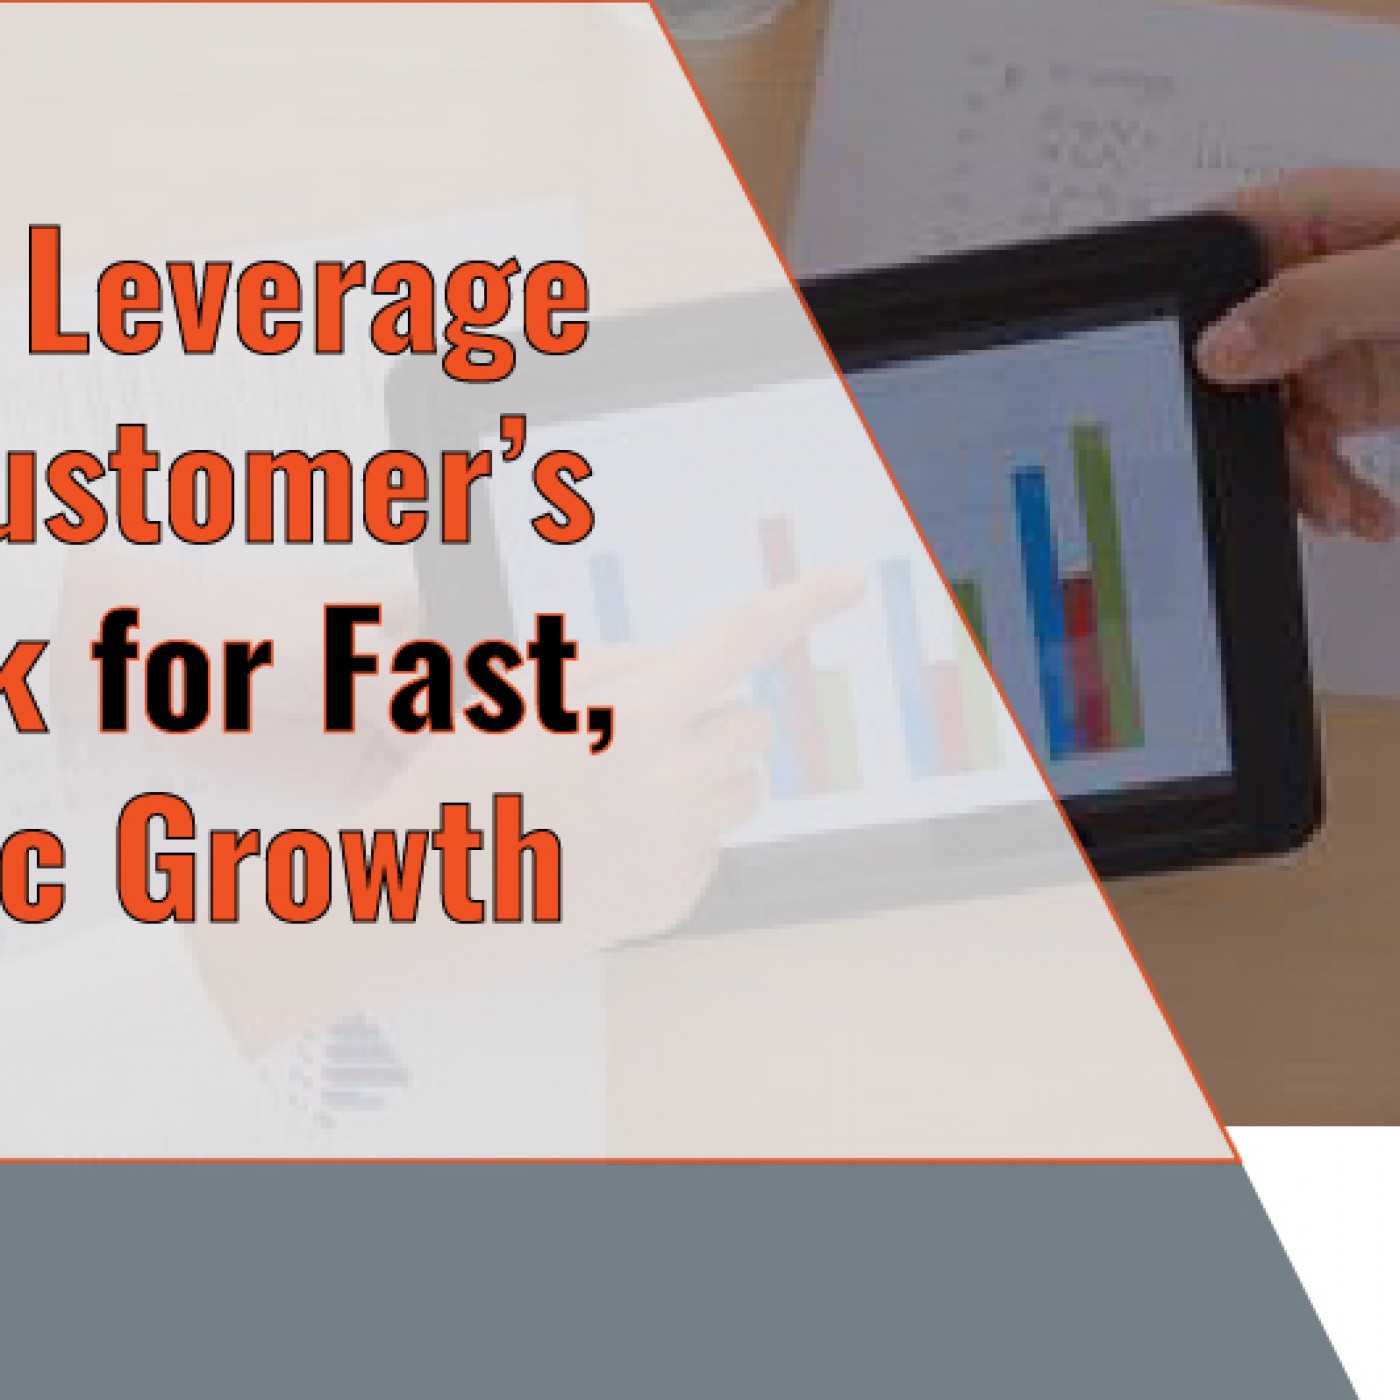 Episode 74: Jay Gibb on How to Leverage Your Customer’s Network for Fast, Organic Growth